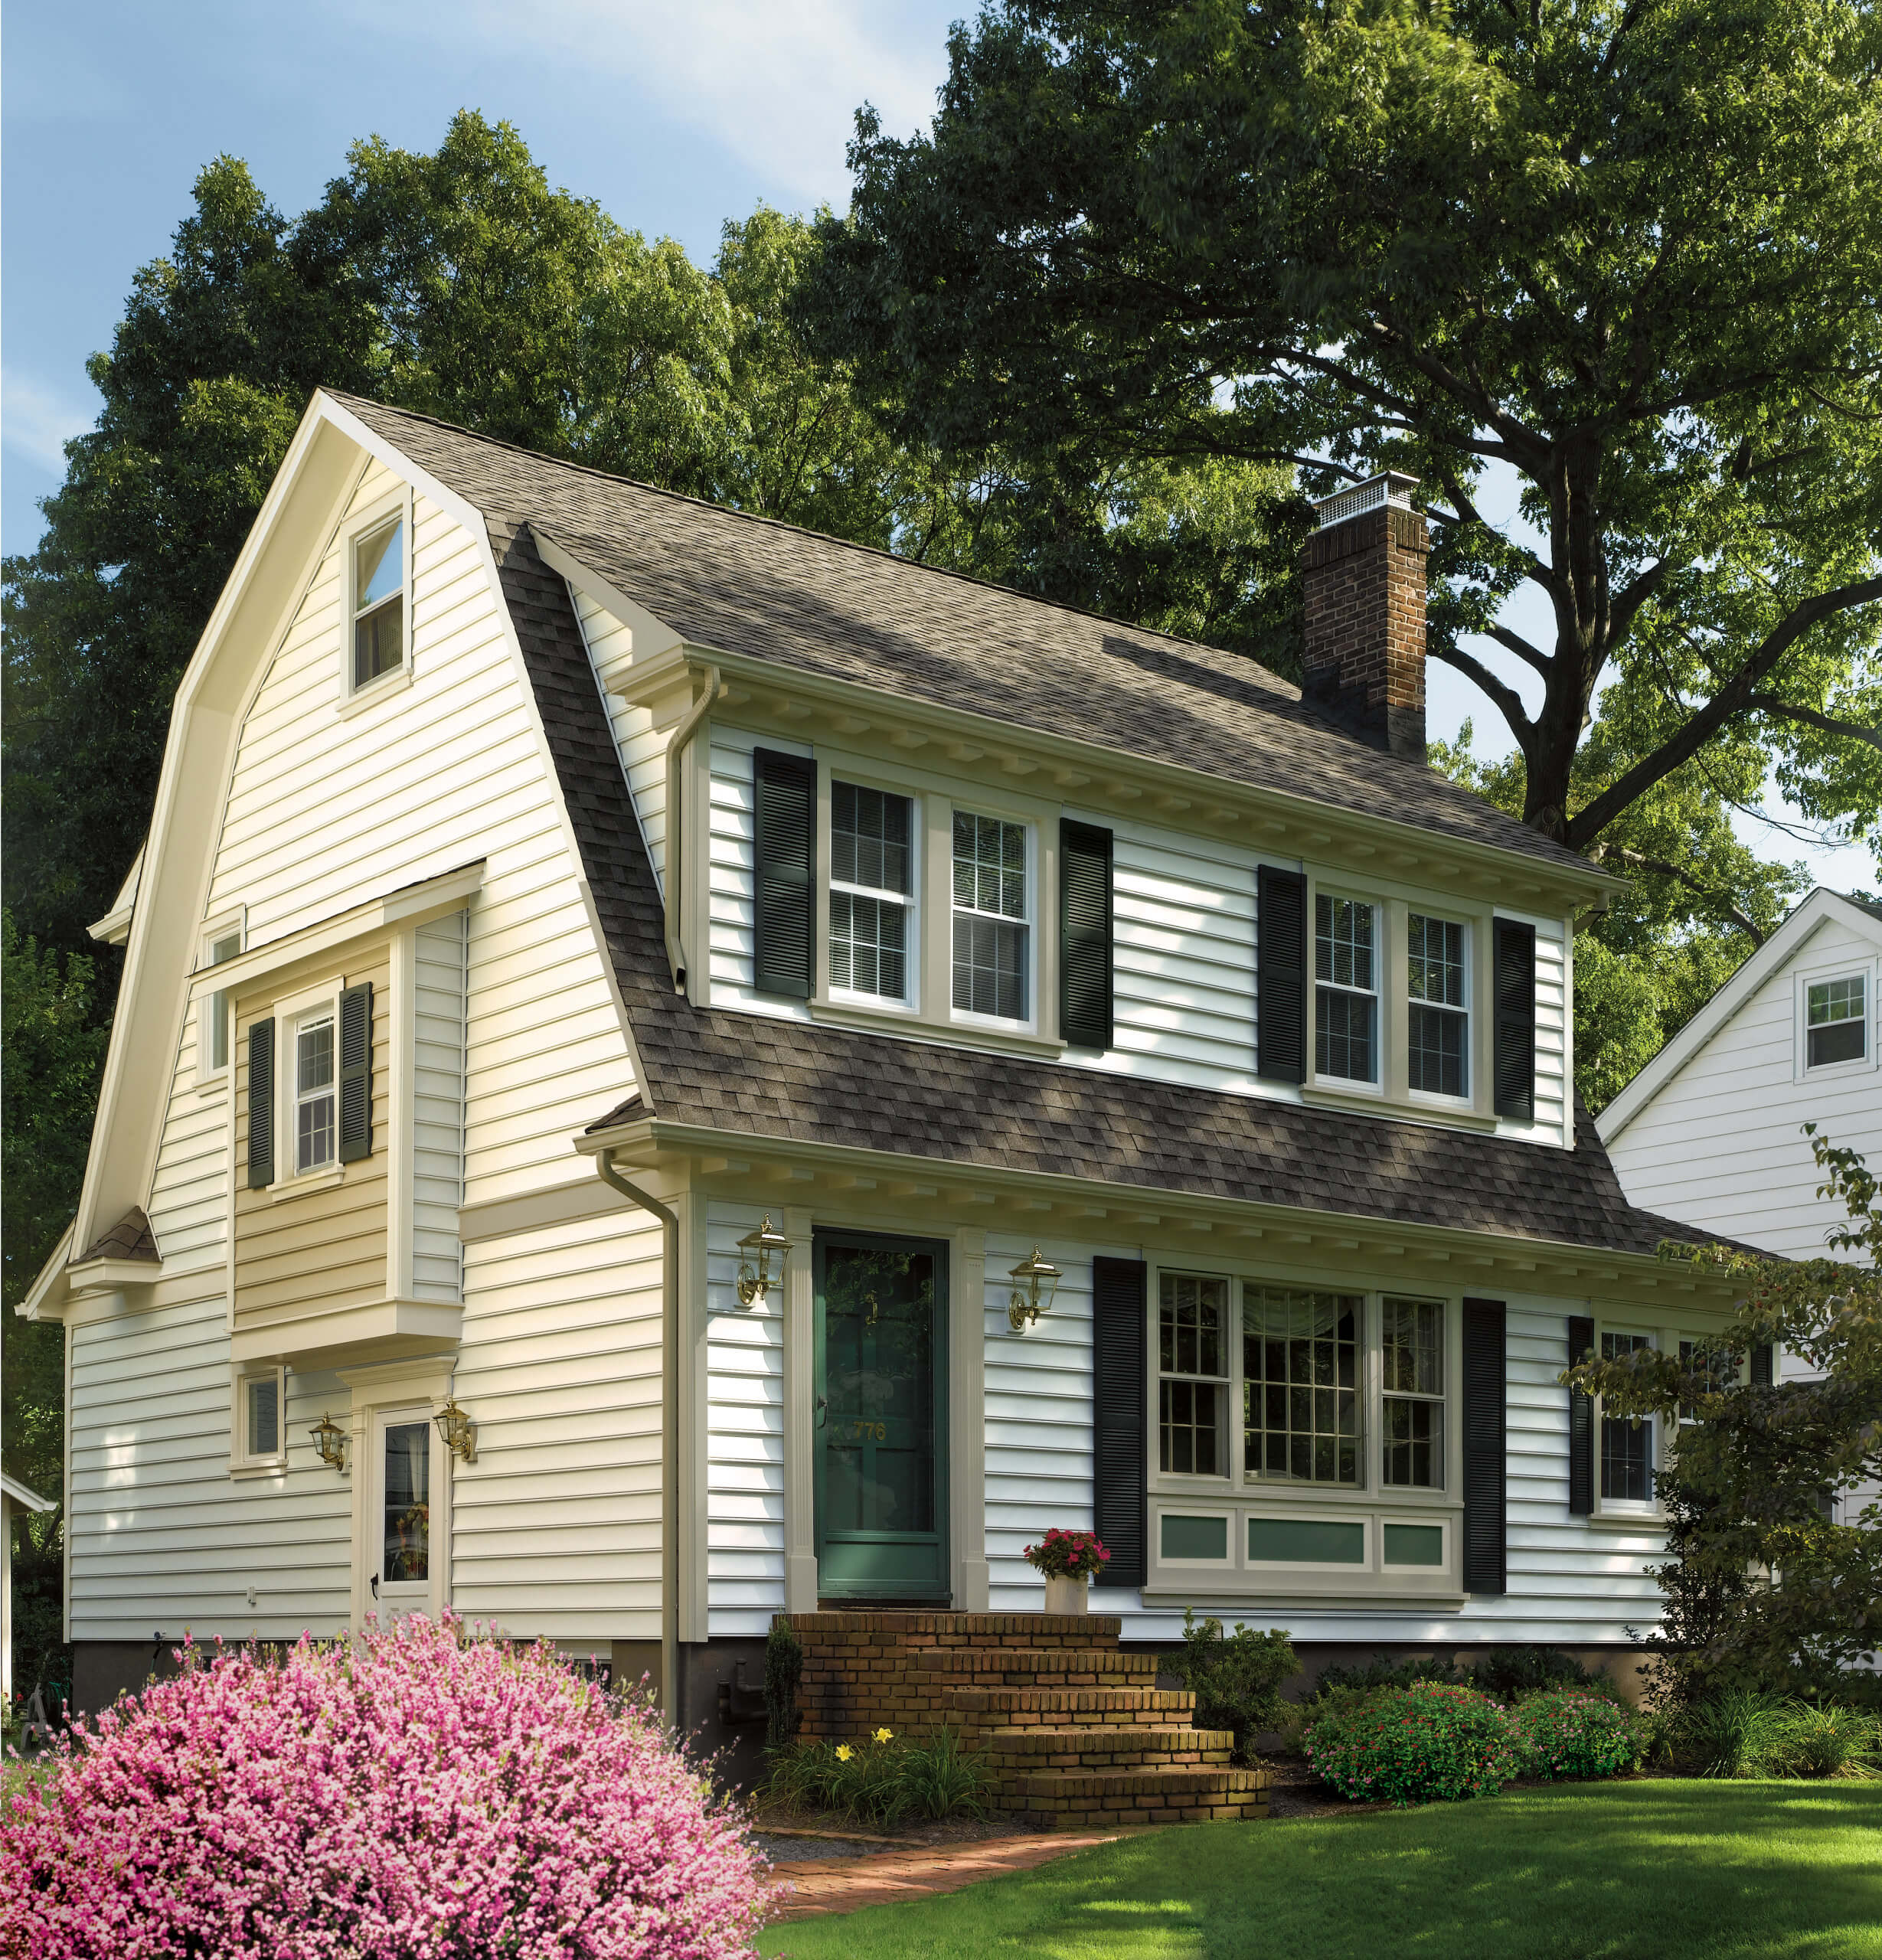 The Difference Between Aluminum And Vinyl Siding